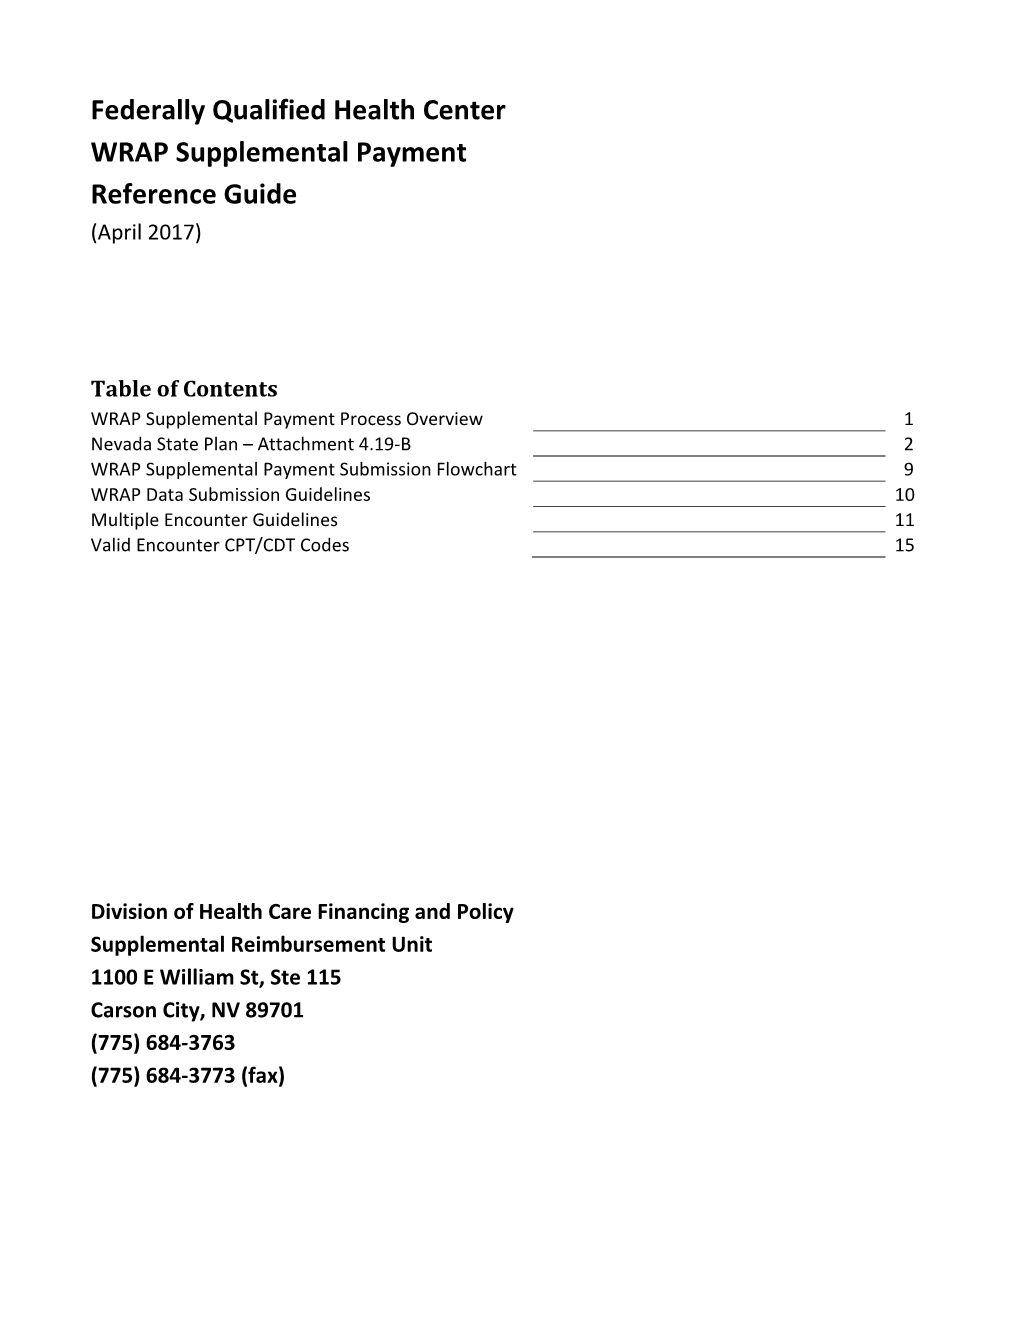 Federally Qualified Health Center WRAP Supplemental Payment Reference Guide (April 2017)